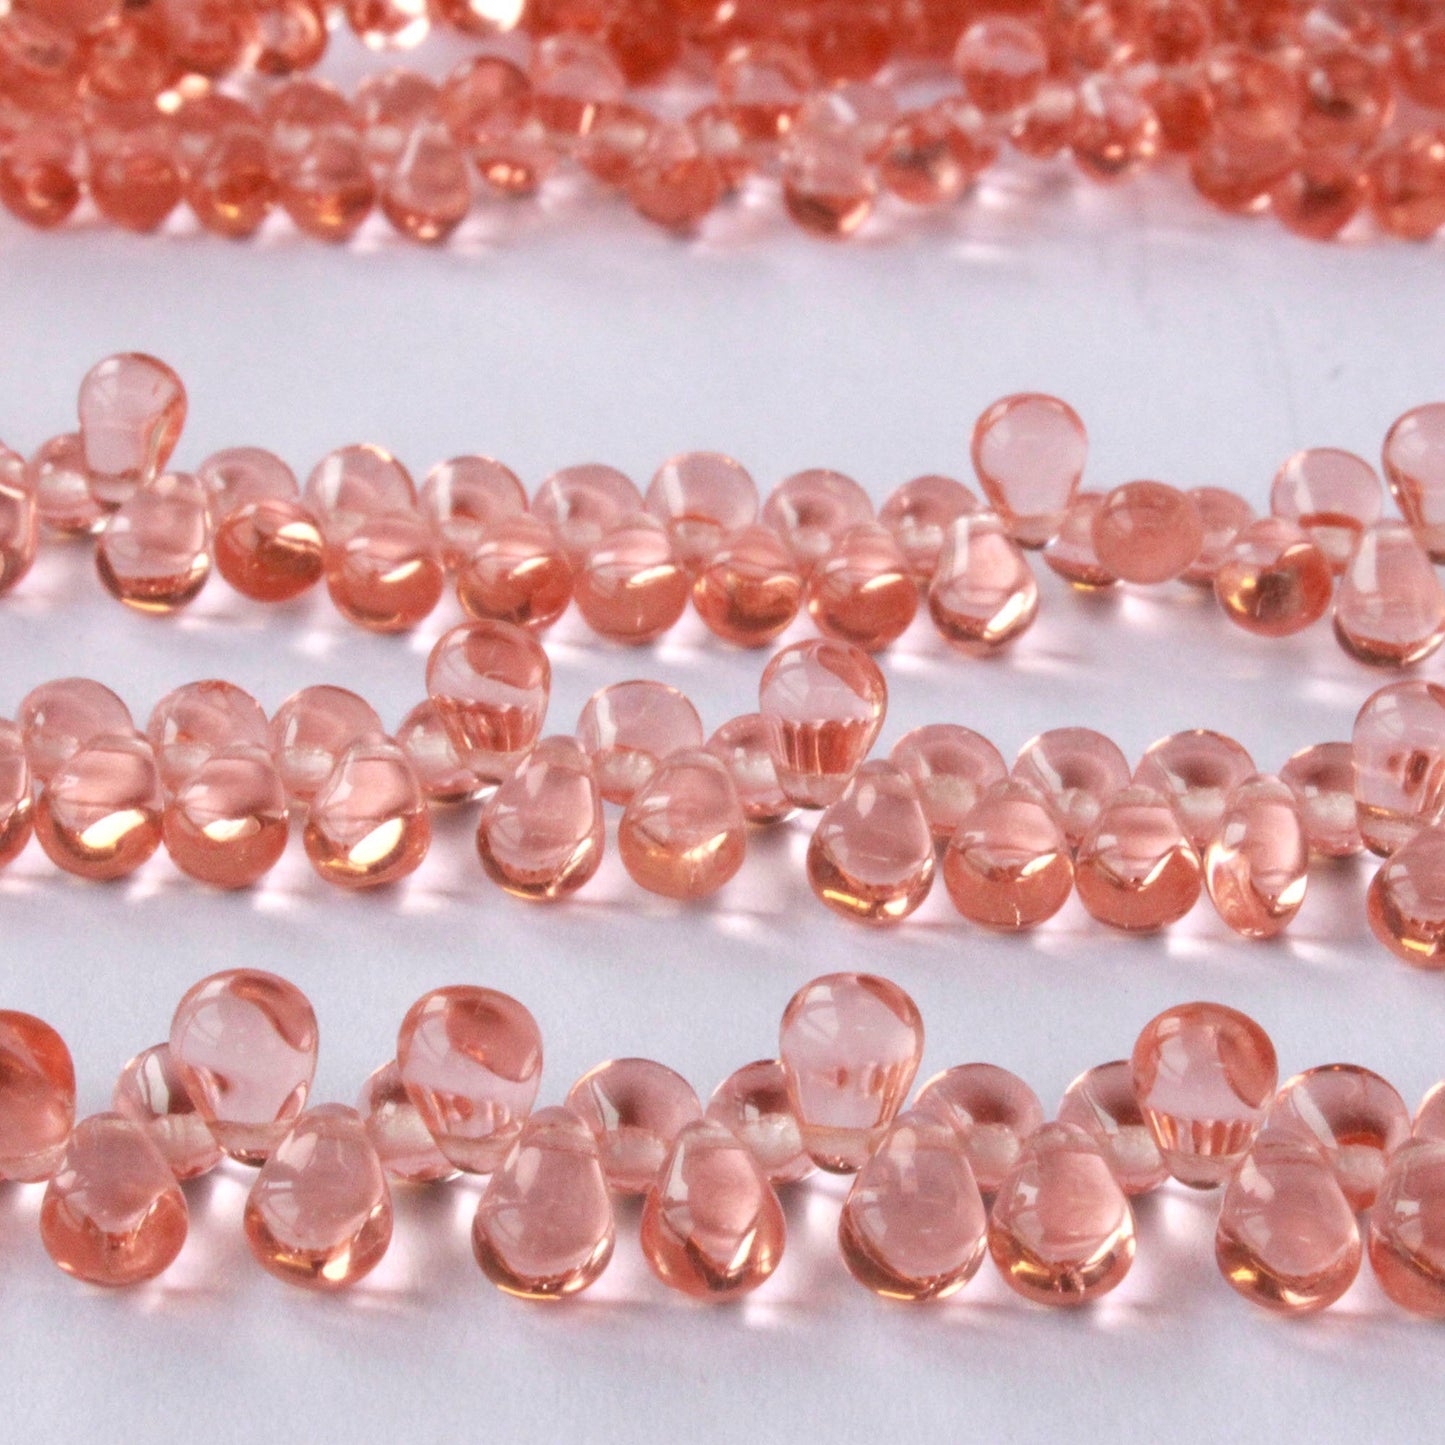 Load image into Gallery viewer, 4x6mm Glass Teardrop Beads - Rosaline - 100 Beads
